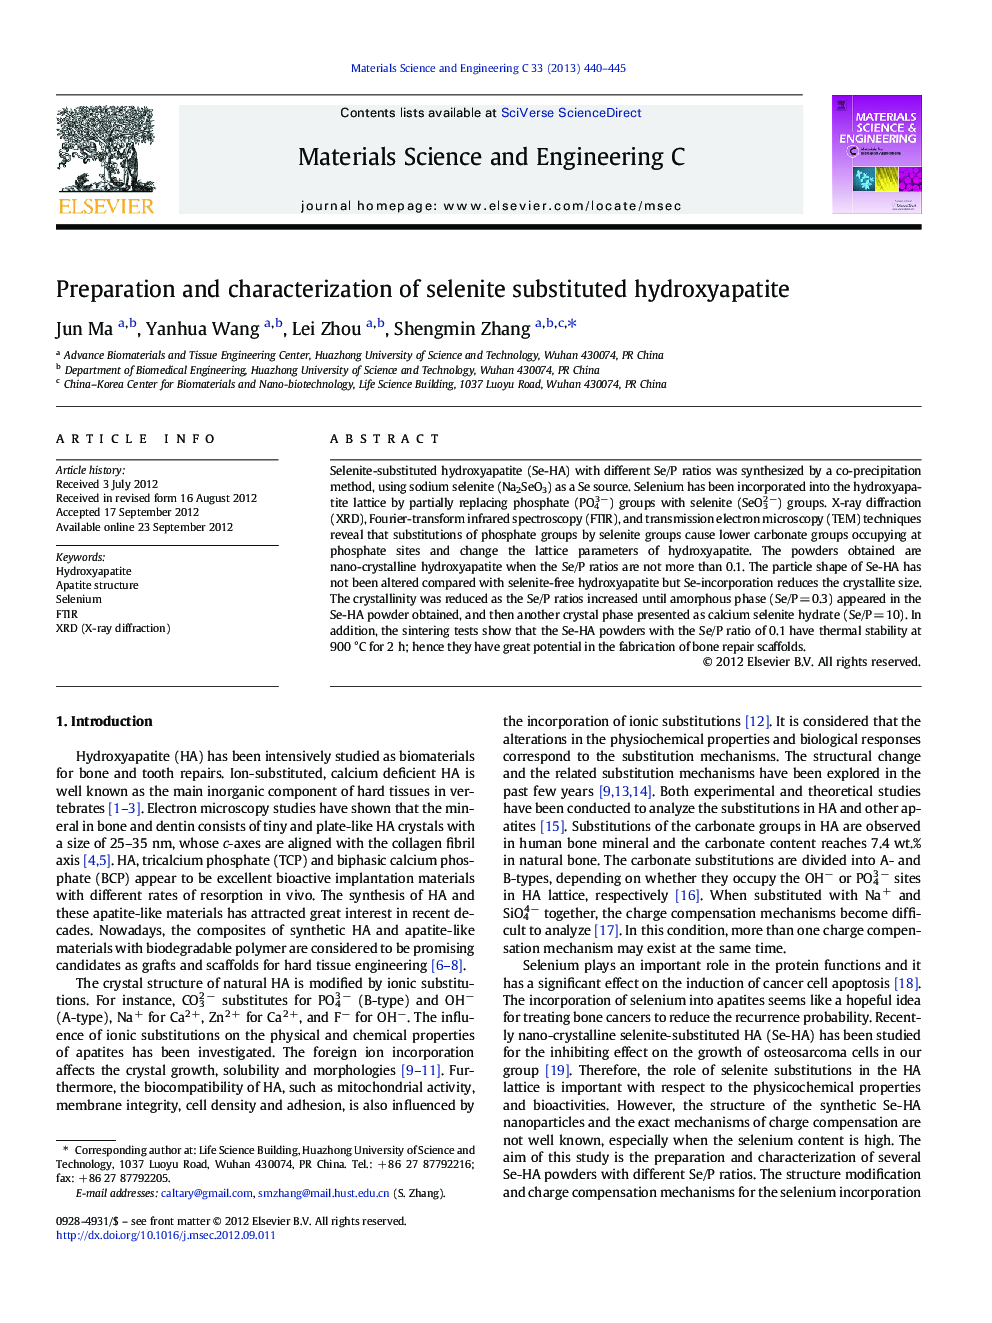 Preparation and characterization of selenite substituted hydroxyapatite